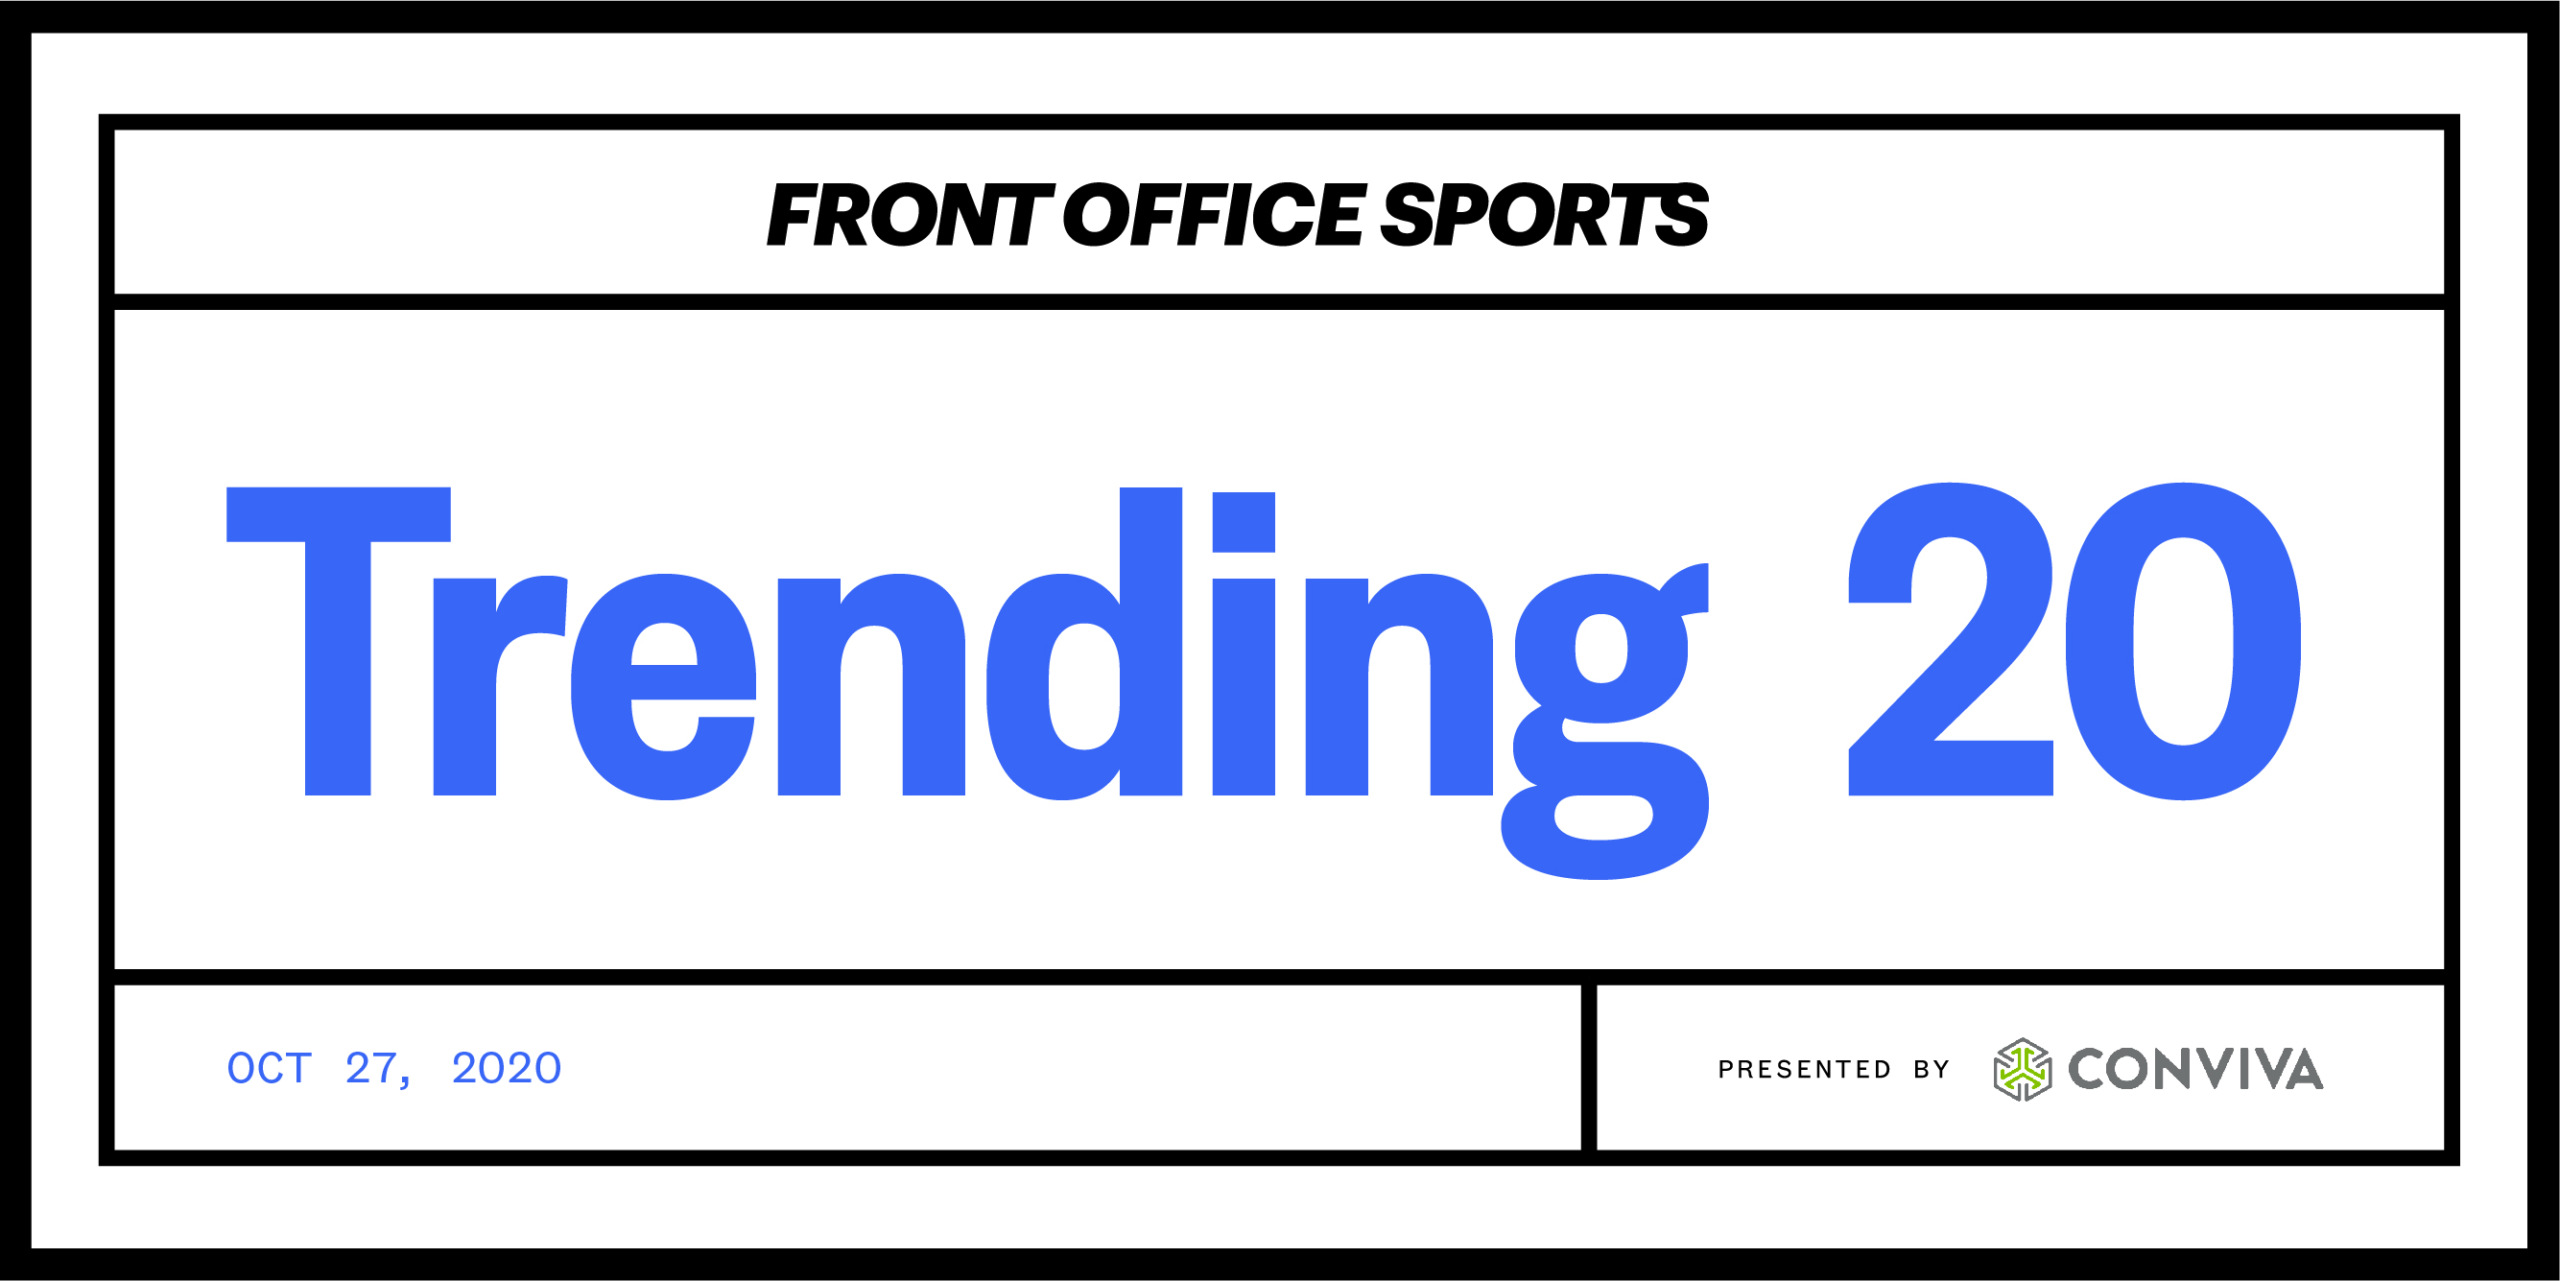 Front Office Sports (@frontofficesports) • Instagram photos and videos